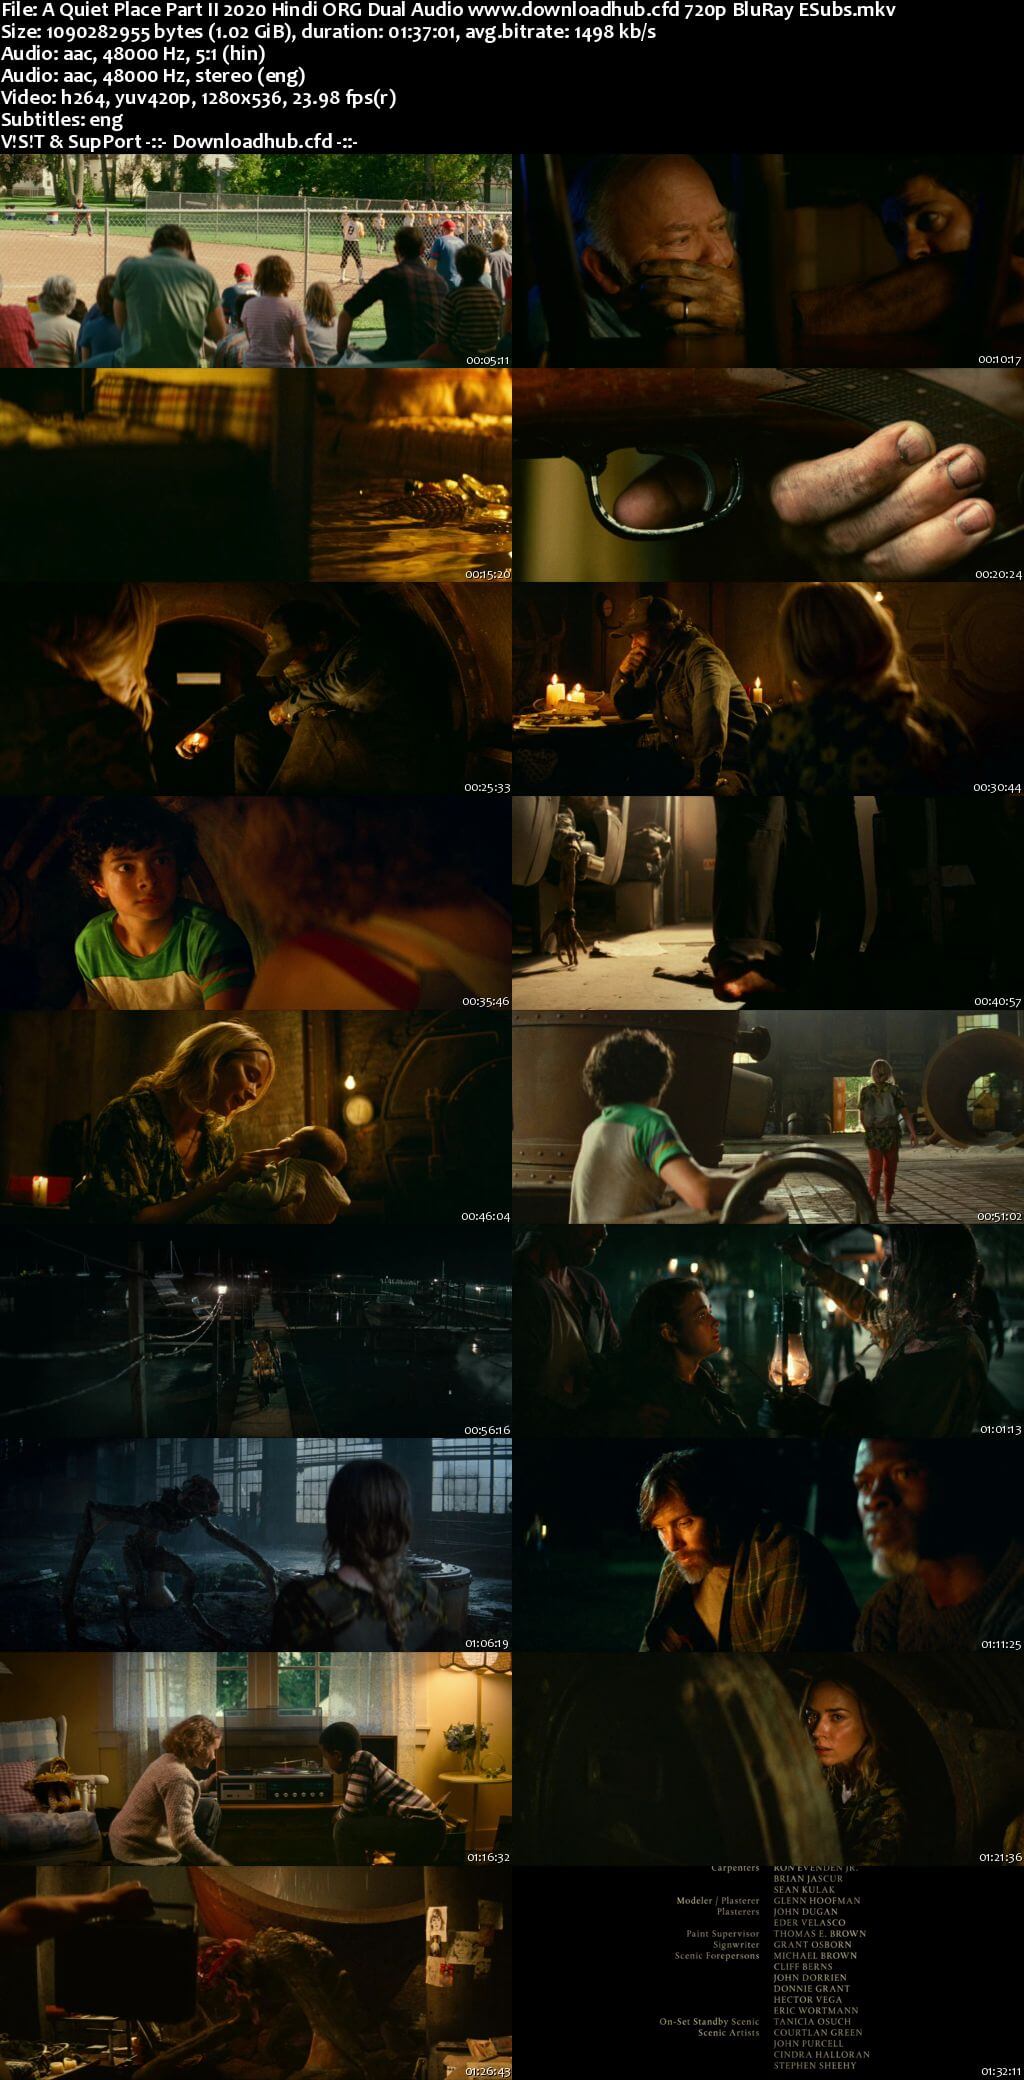 A Quiet Place Part II 2020 Hindi ORG Dual Audio 720p BluRay ESubs